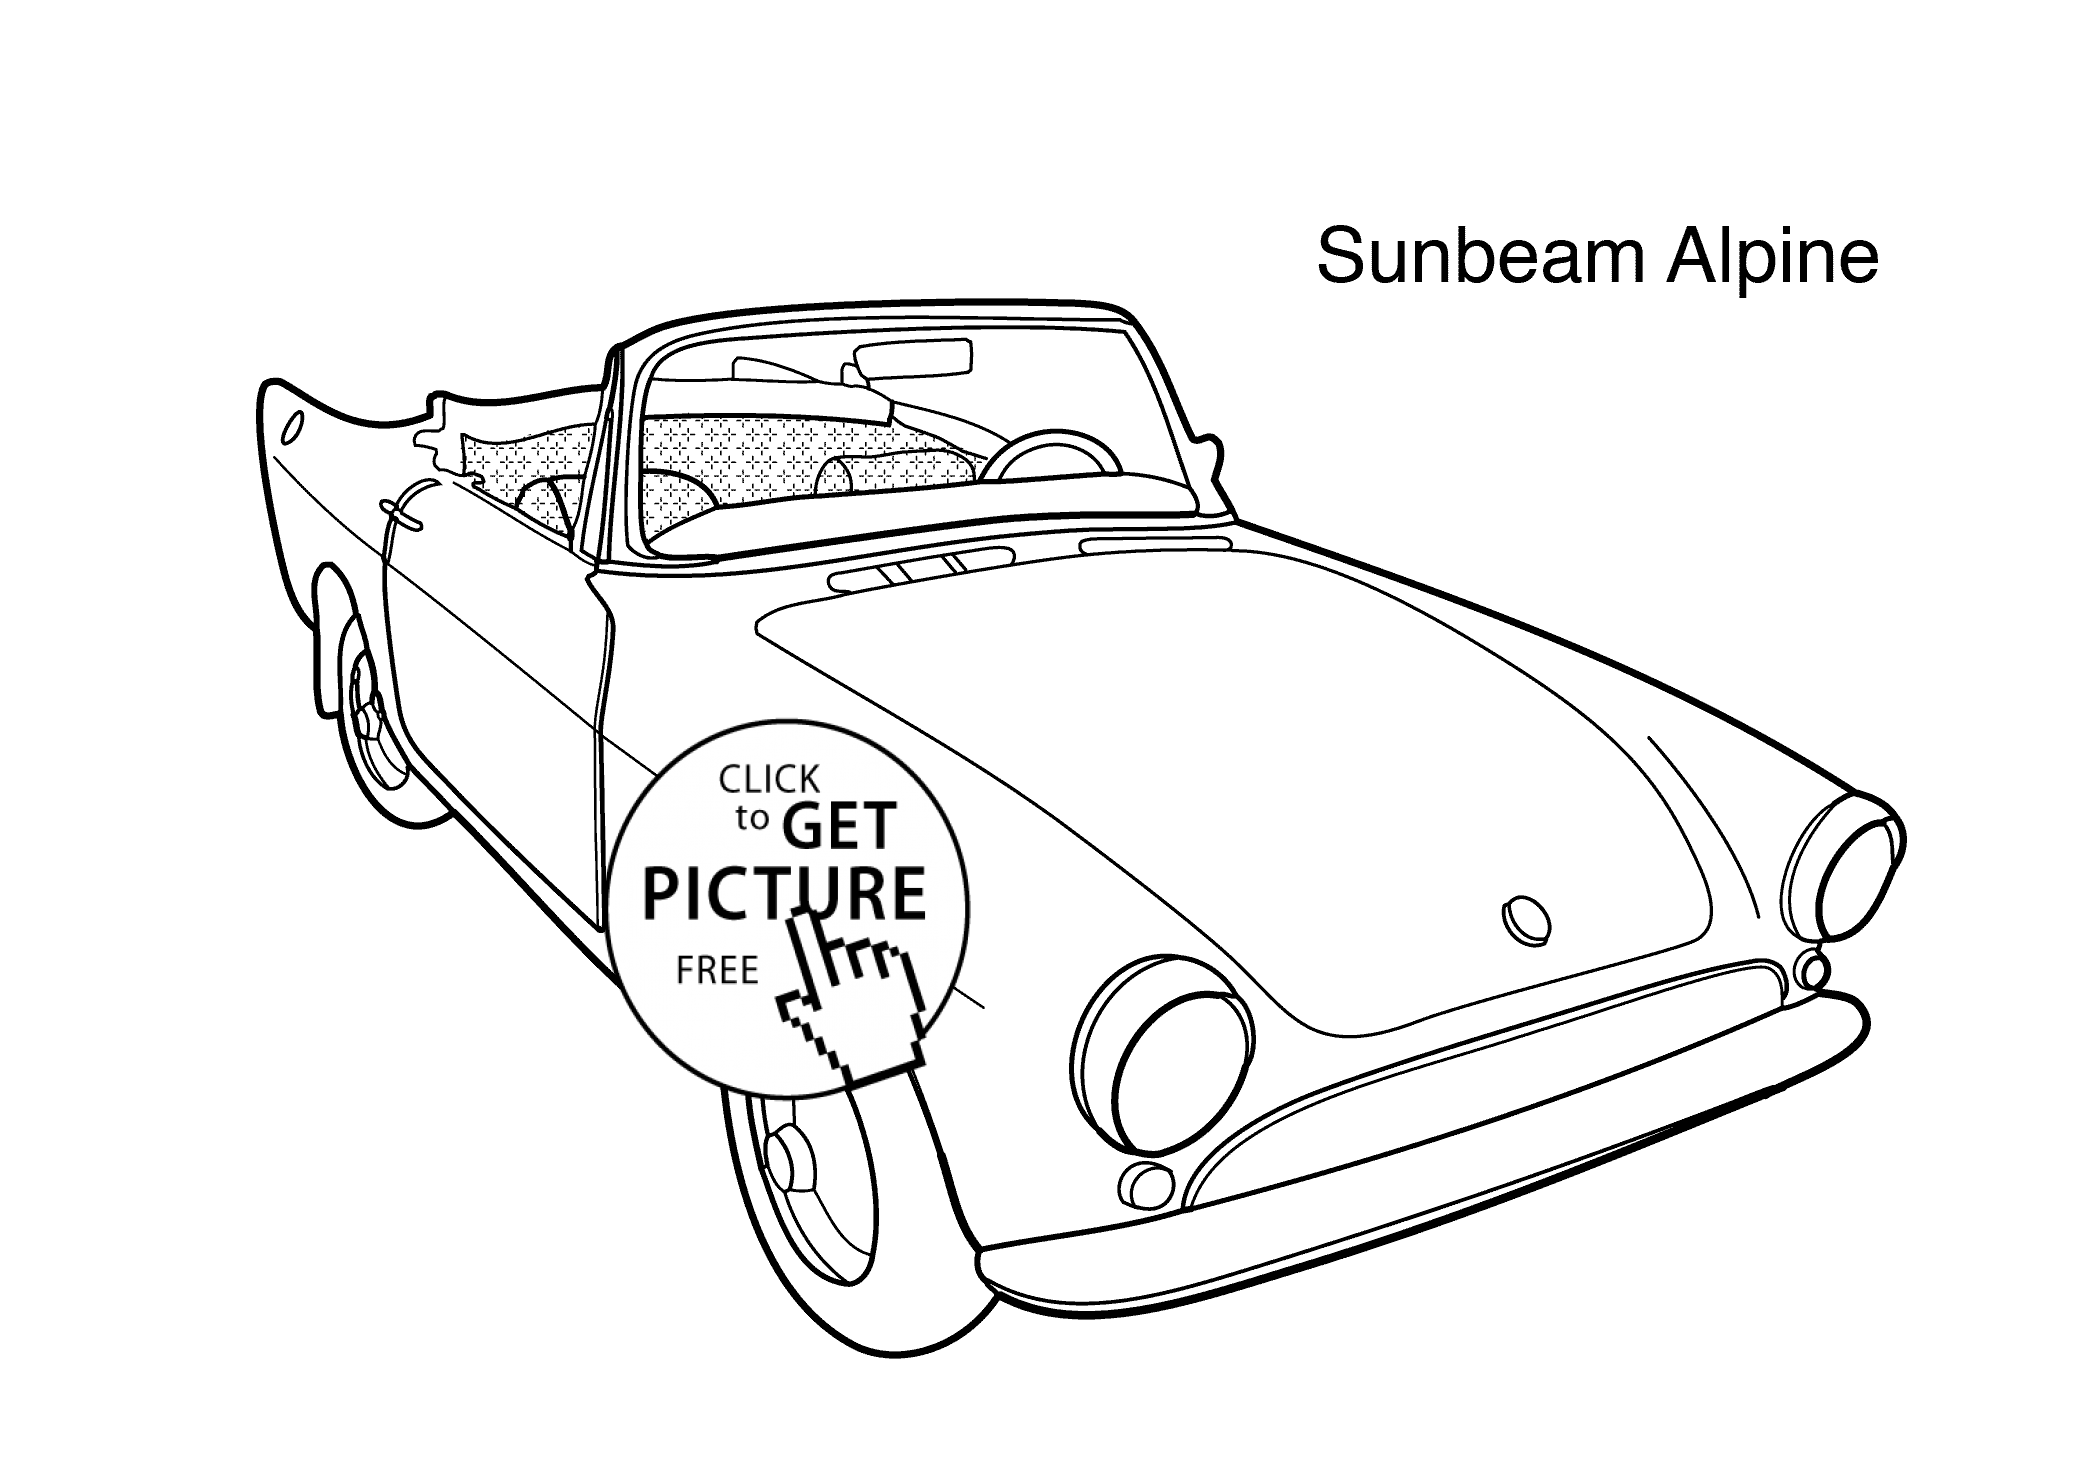 Super car Sunbeam Alpine coloring page for kids, printable free ...